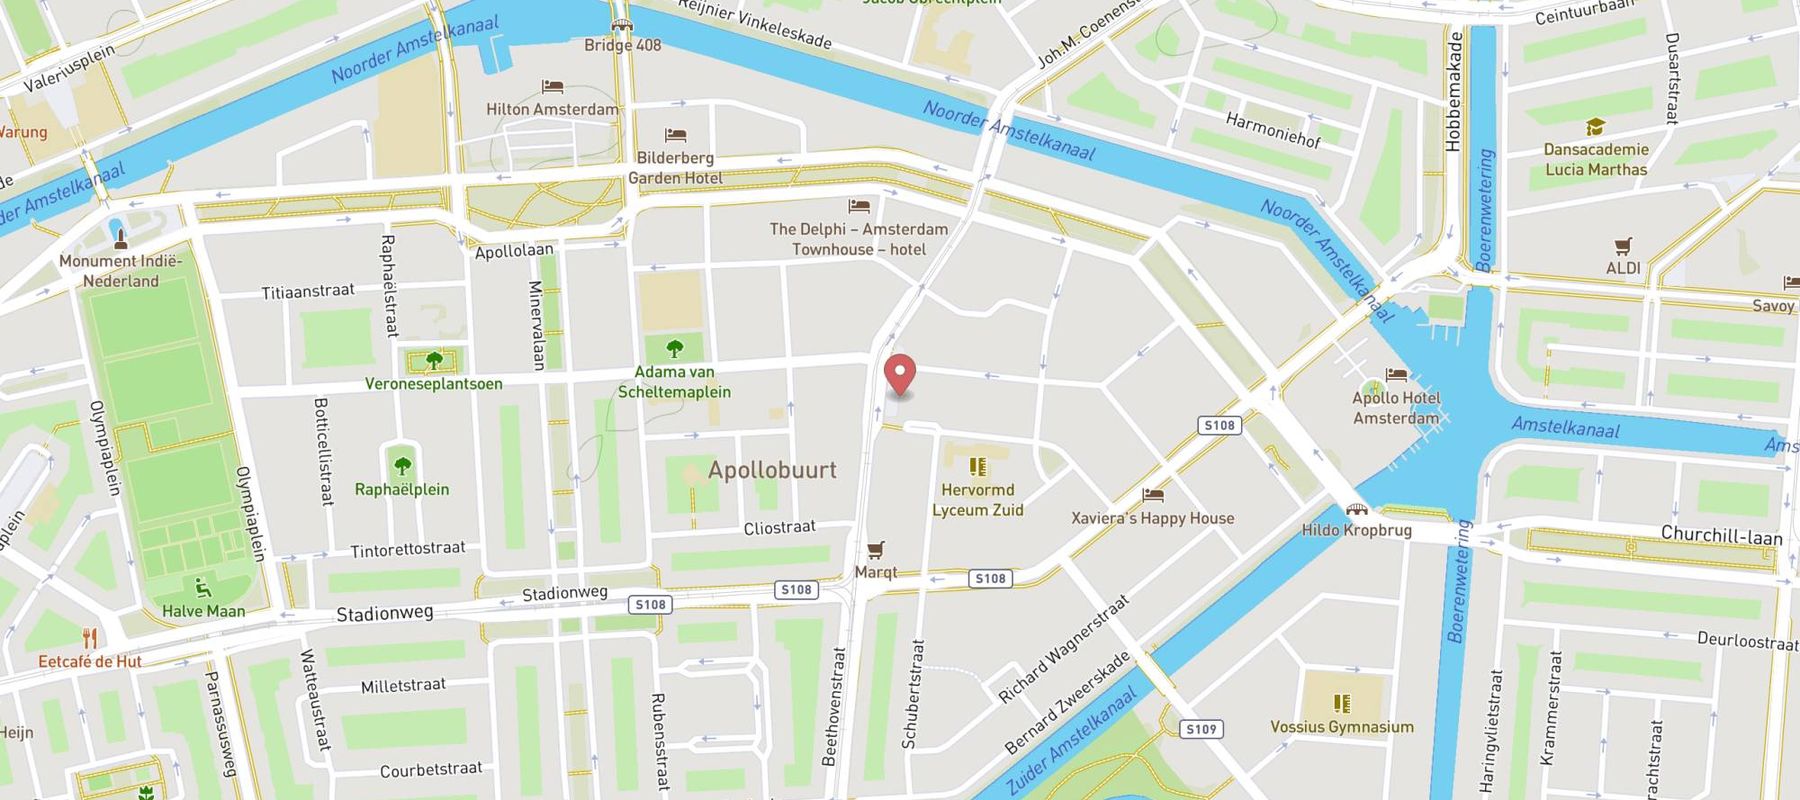 Pearle Opticiens Amsterdam - Zuid map